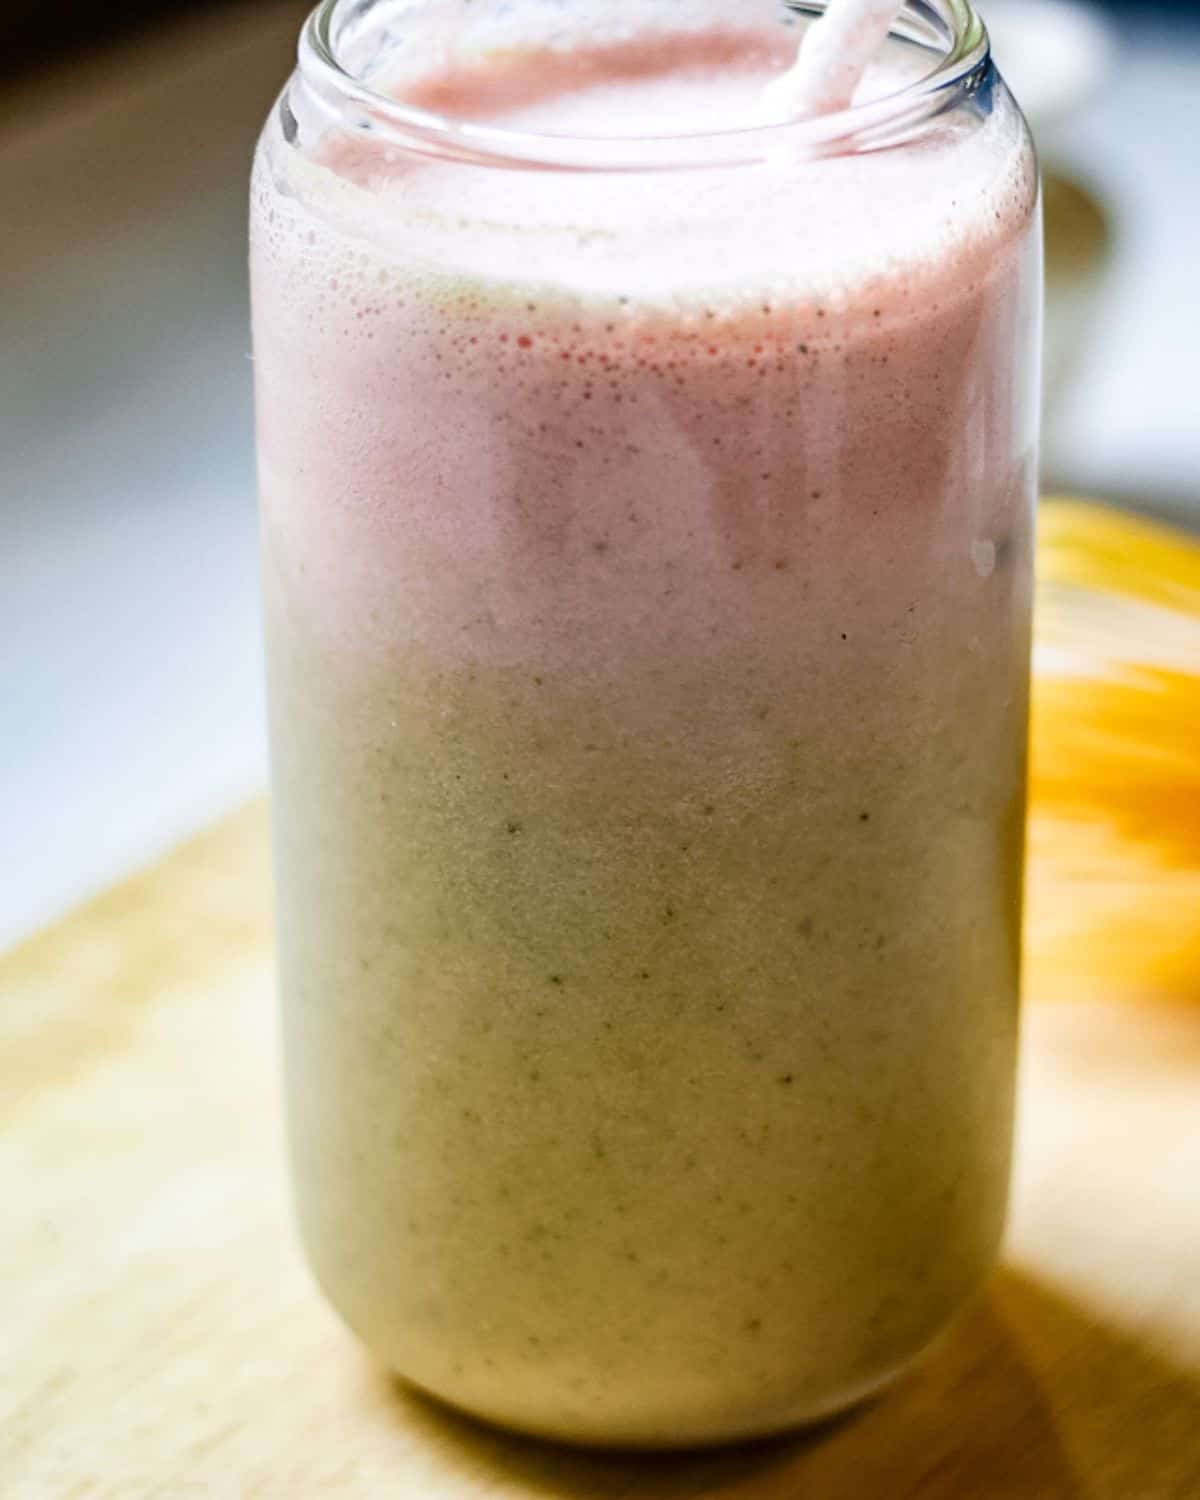 Strawberry matcha latte in a glass with two distinct layers: green at the bottom and pink on top.